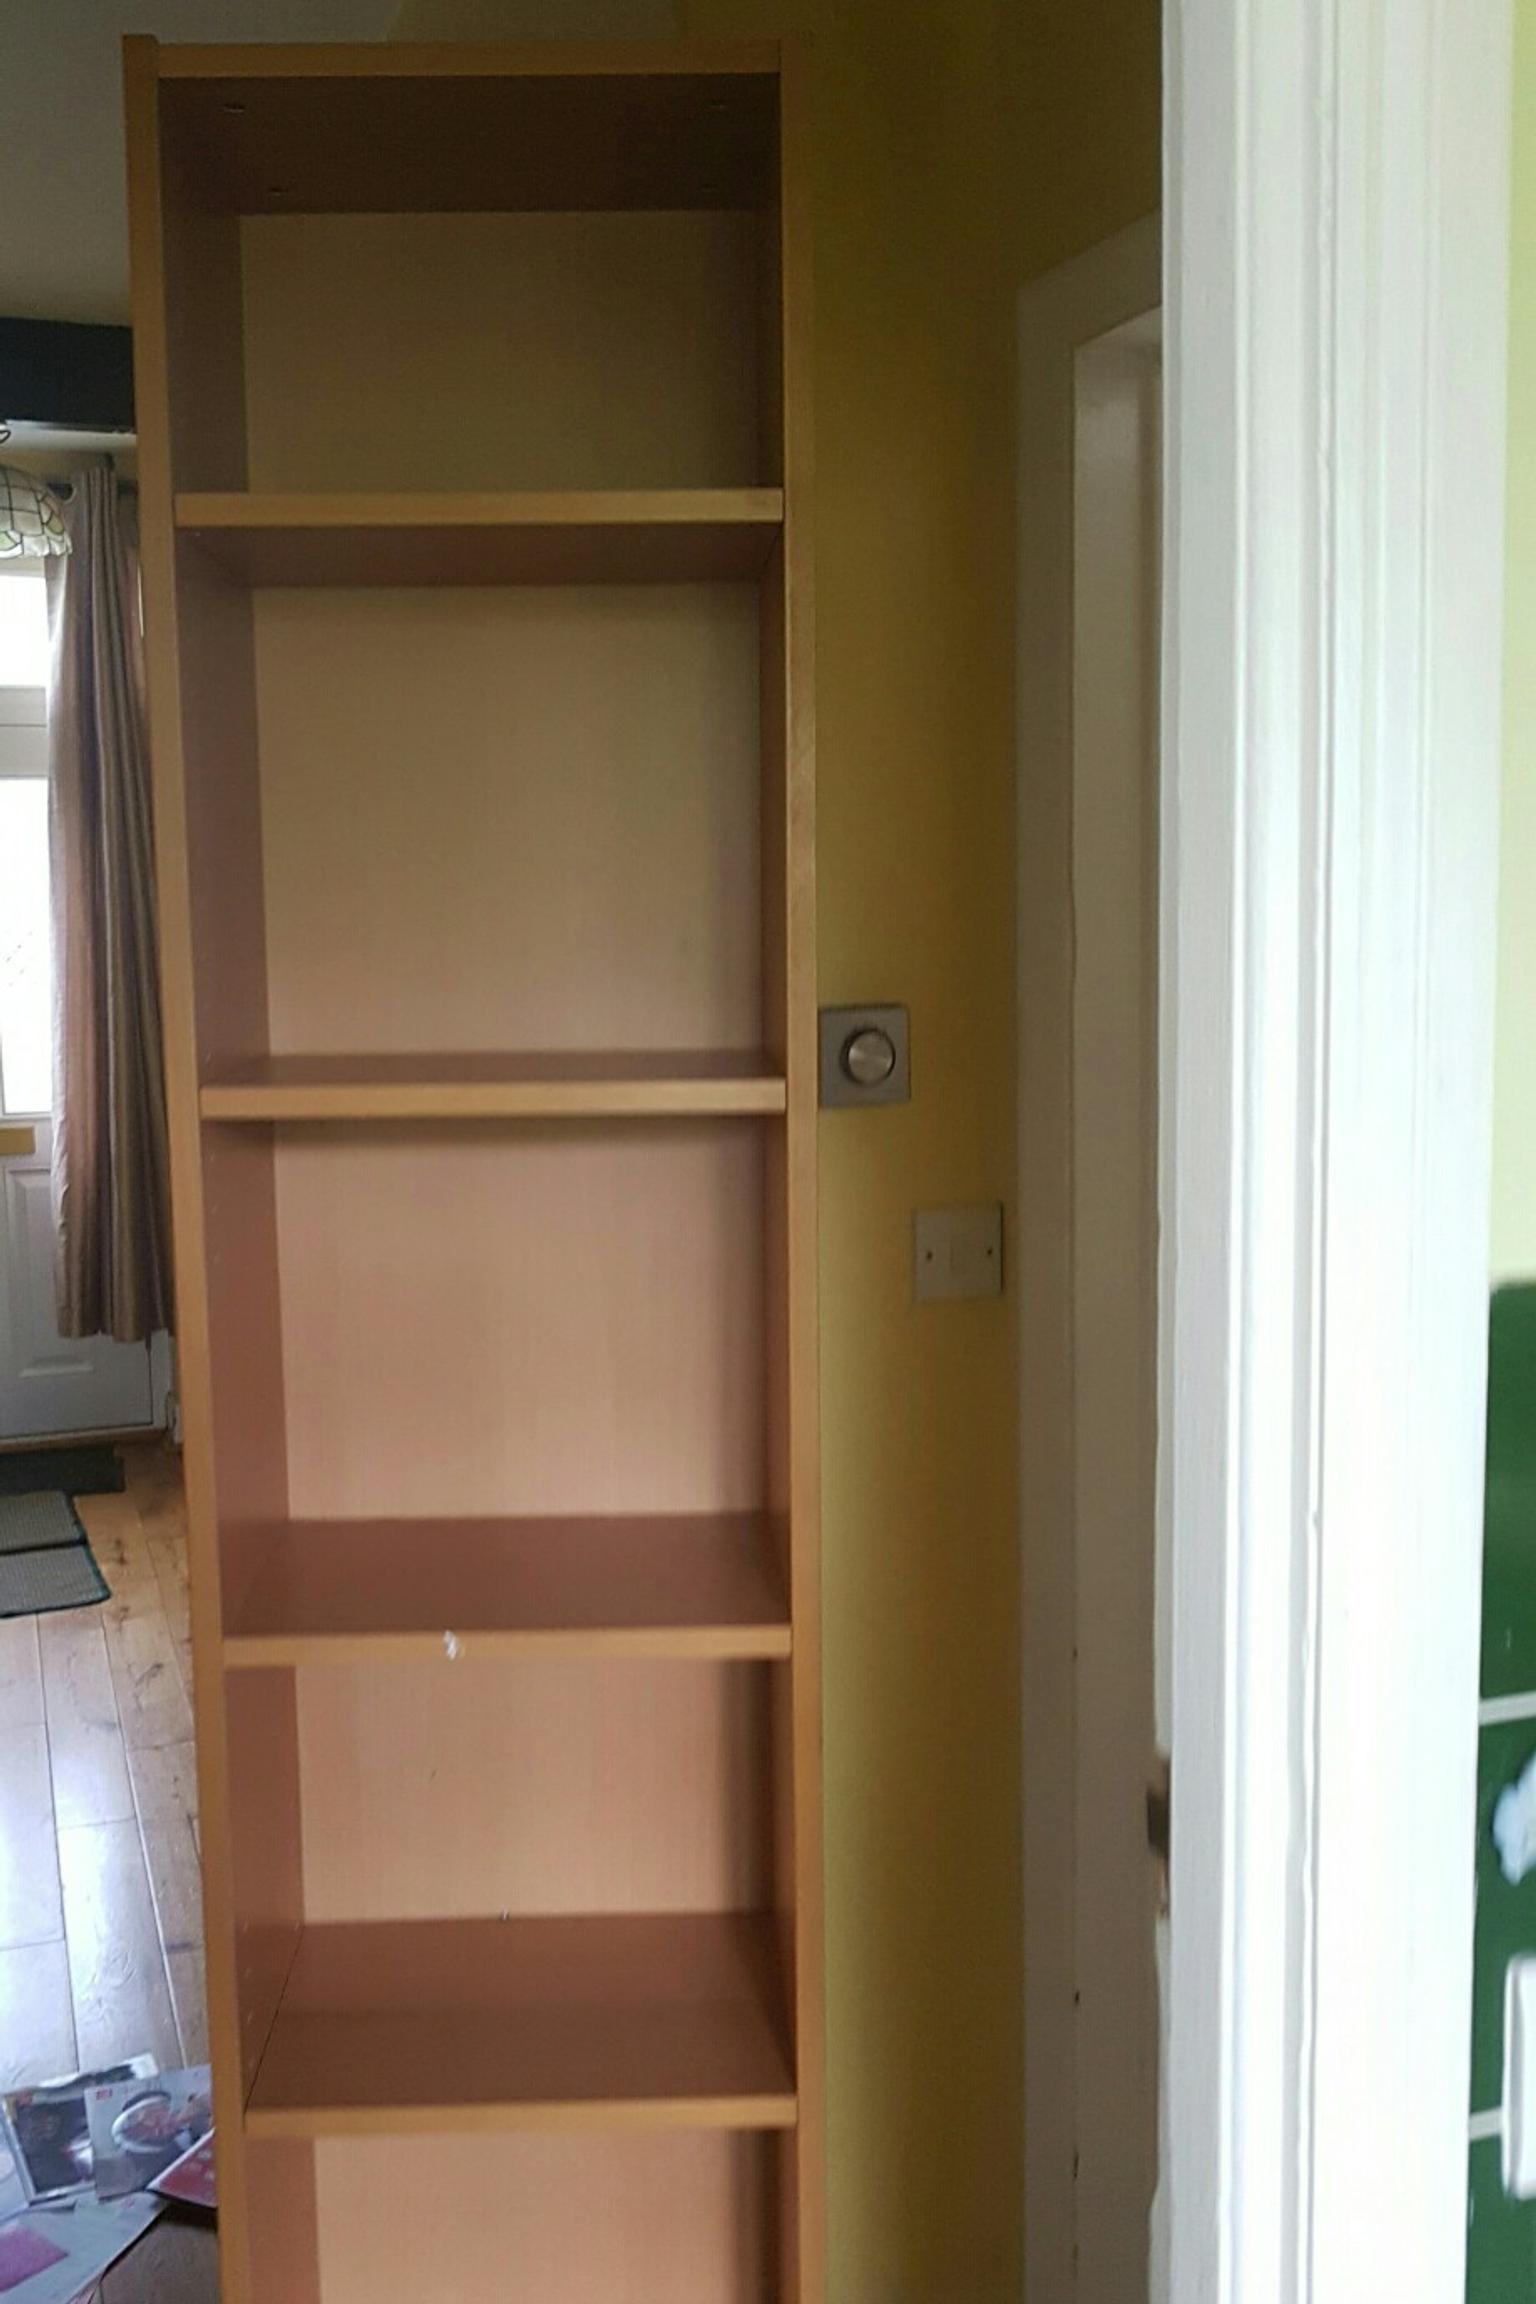 Ikea Billy Bookcase In Cr7 Heath For 20 00 For Sale Shpock